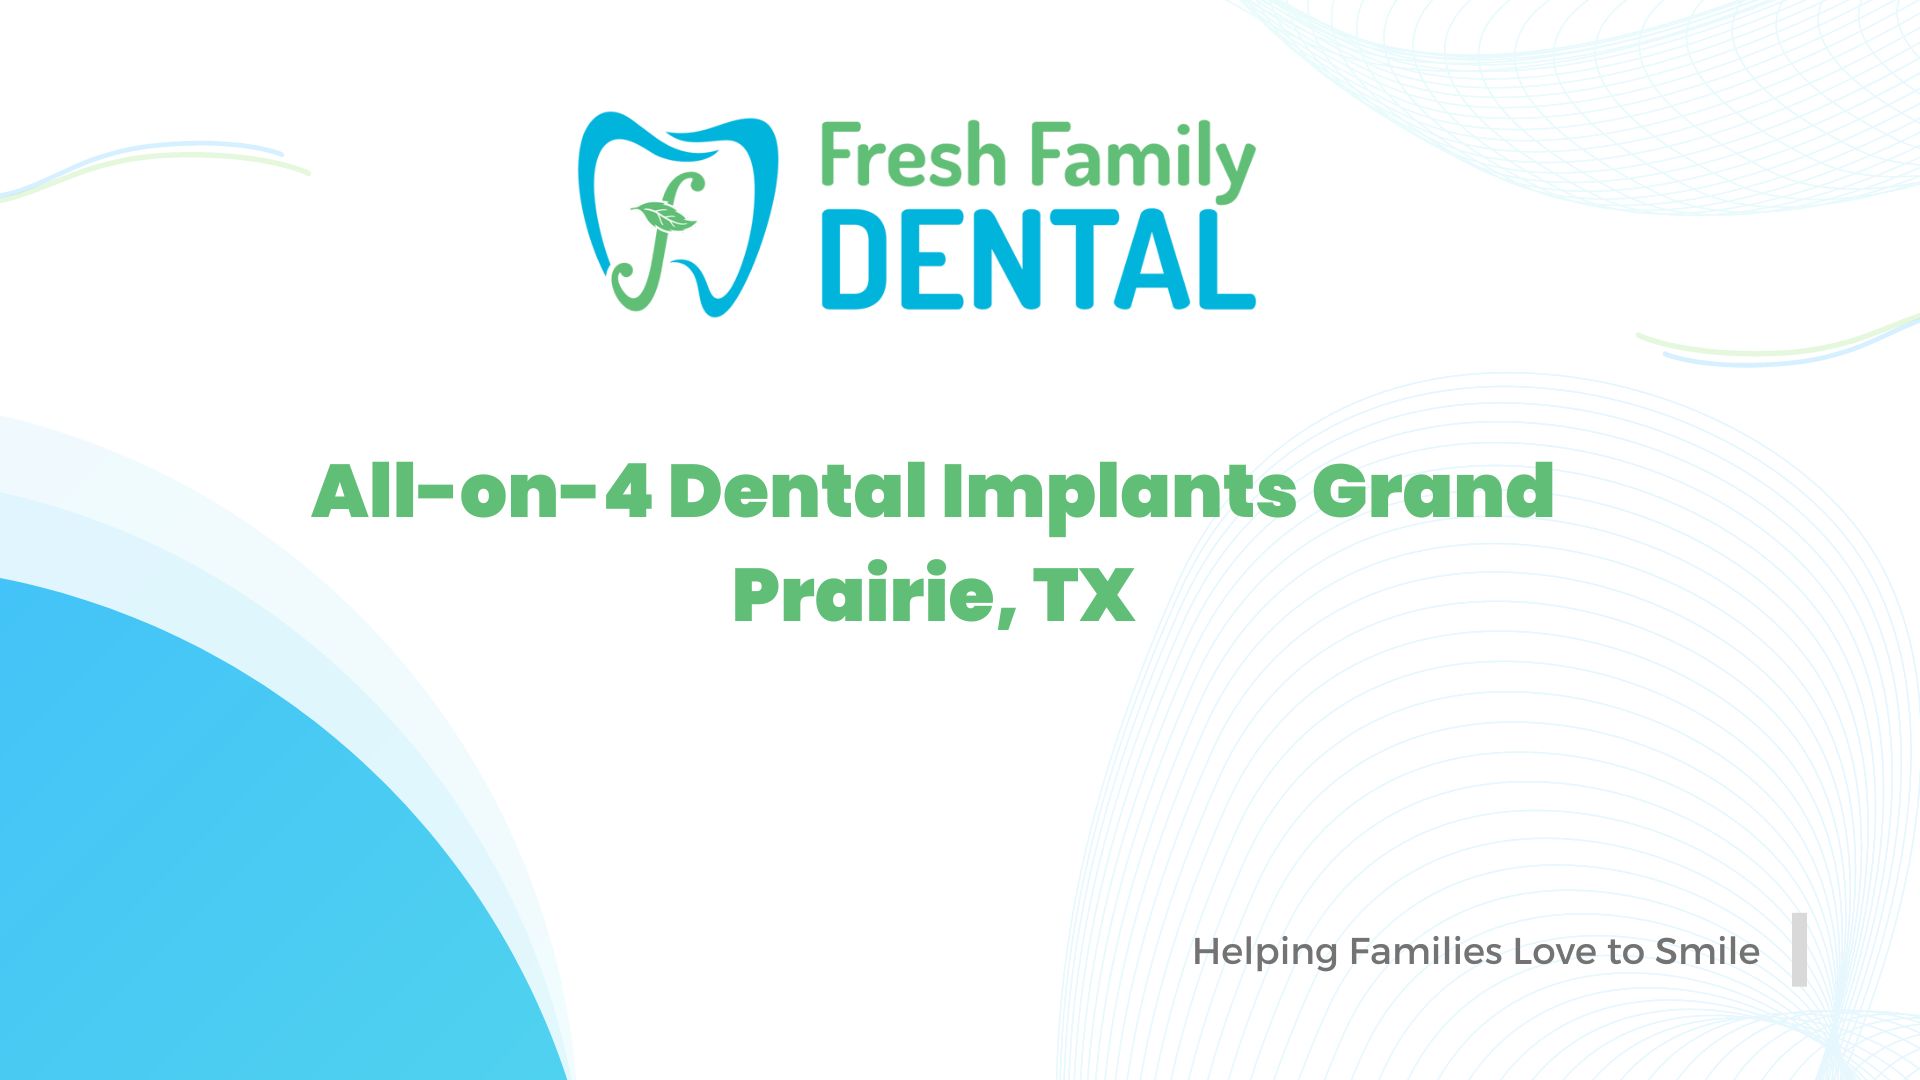  Procedure for All-on-4 Dental Implants in Grand Prairie, TX